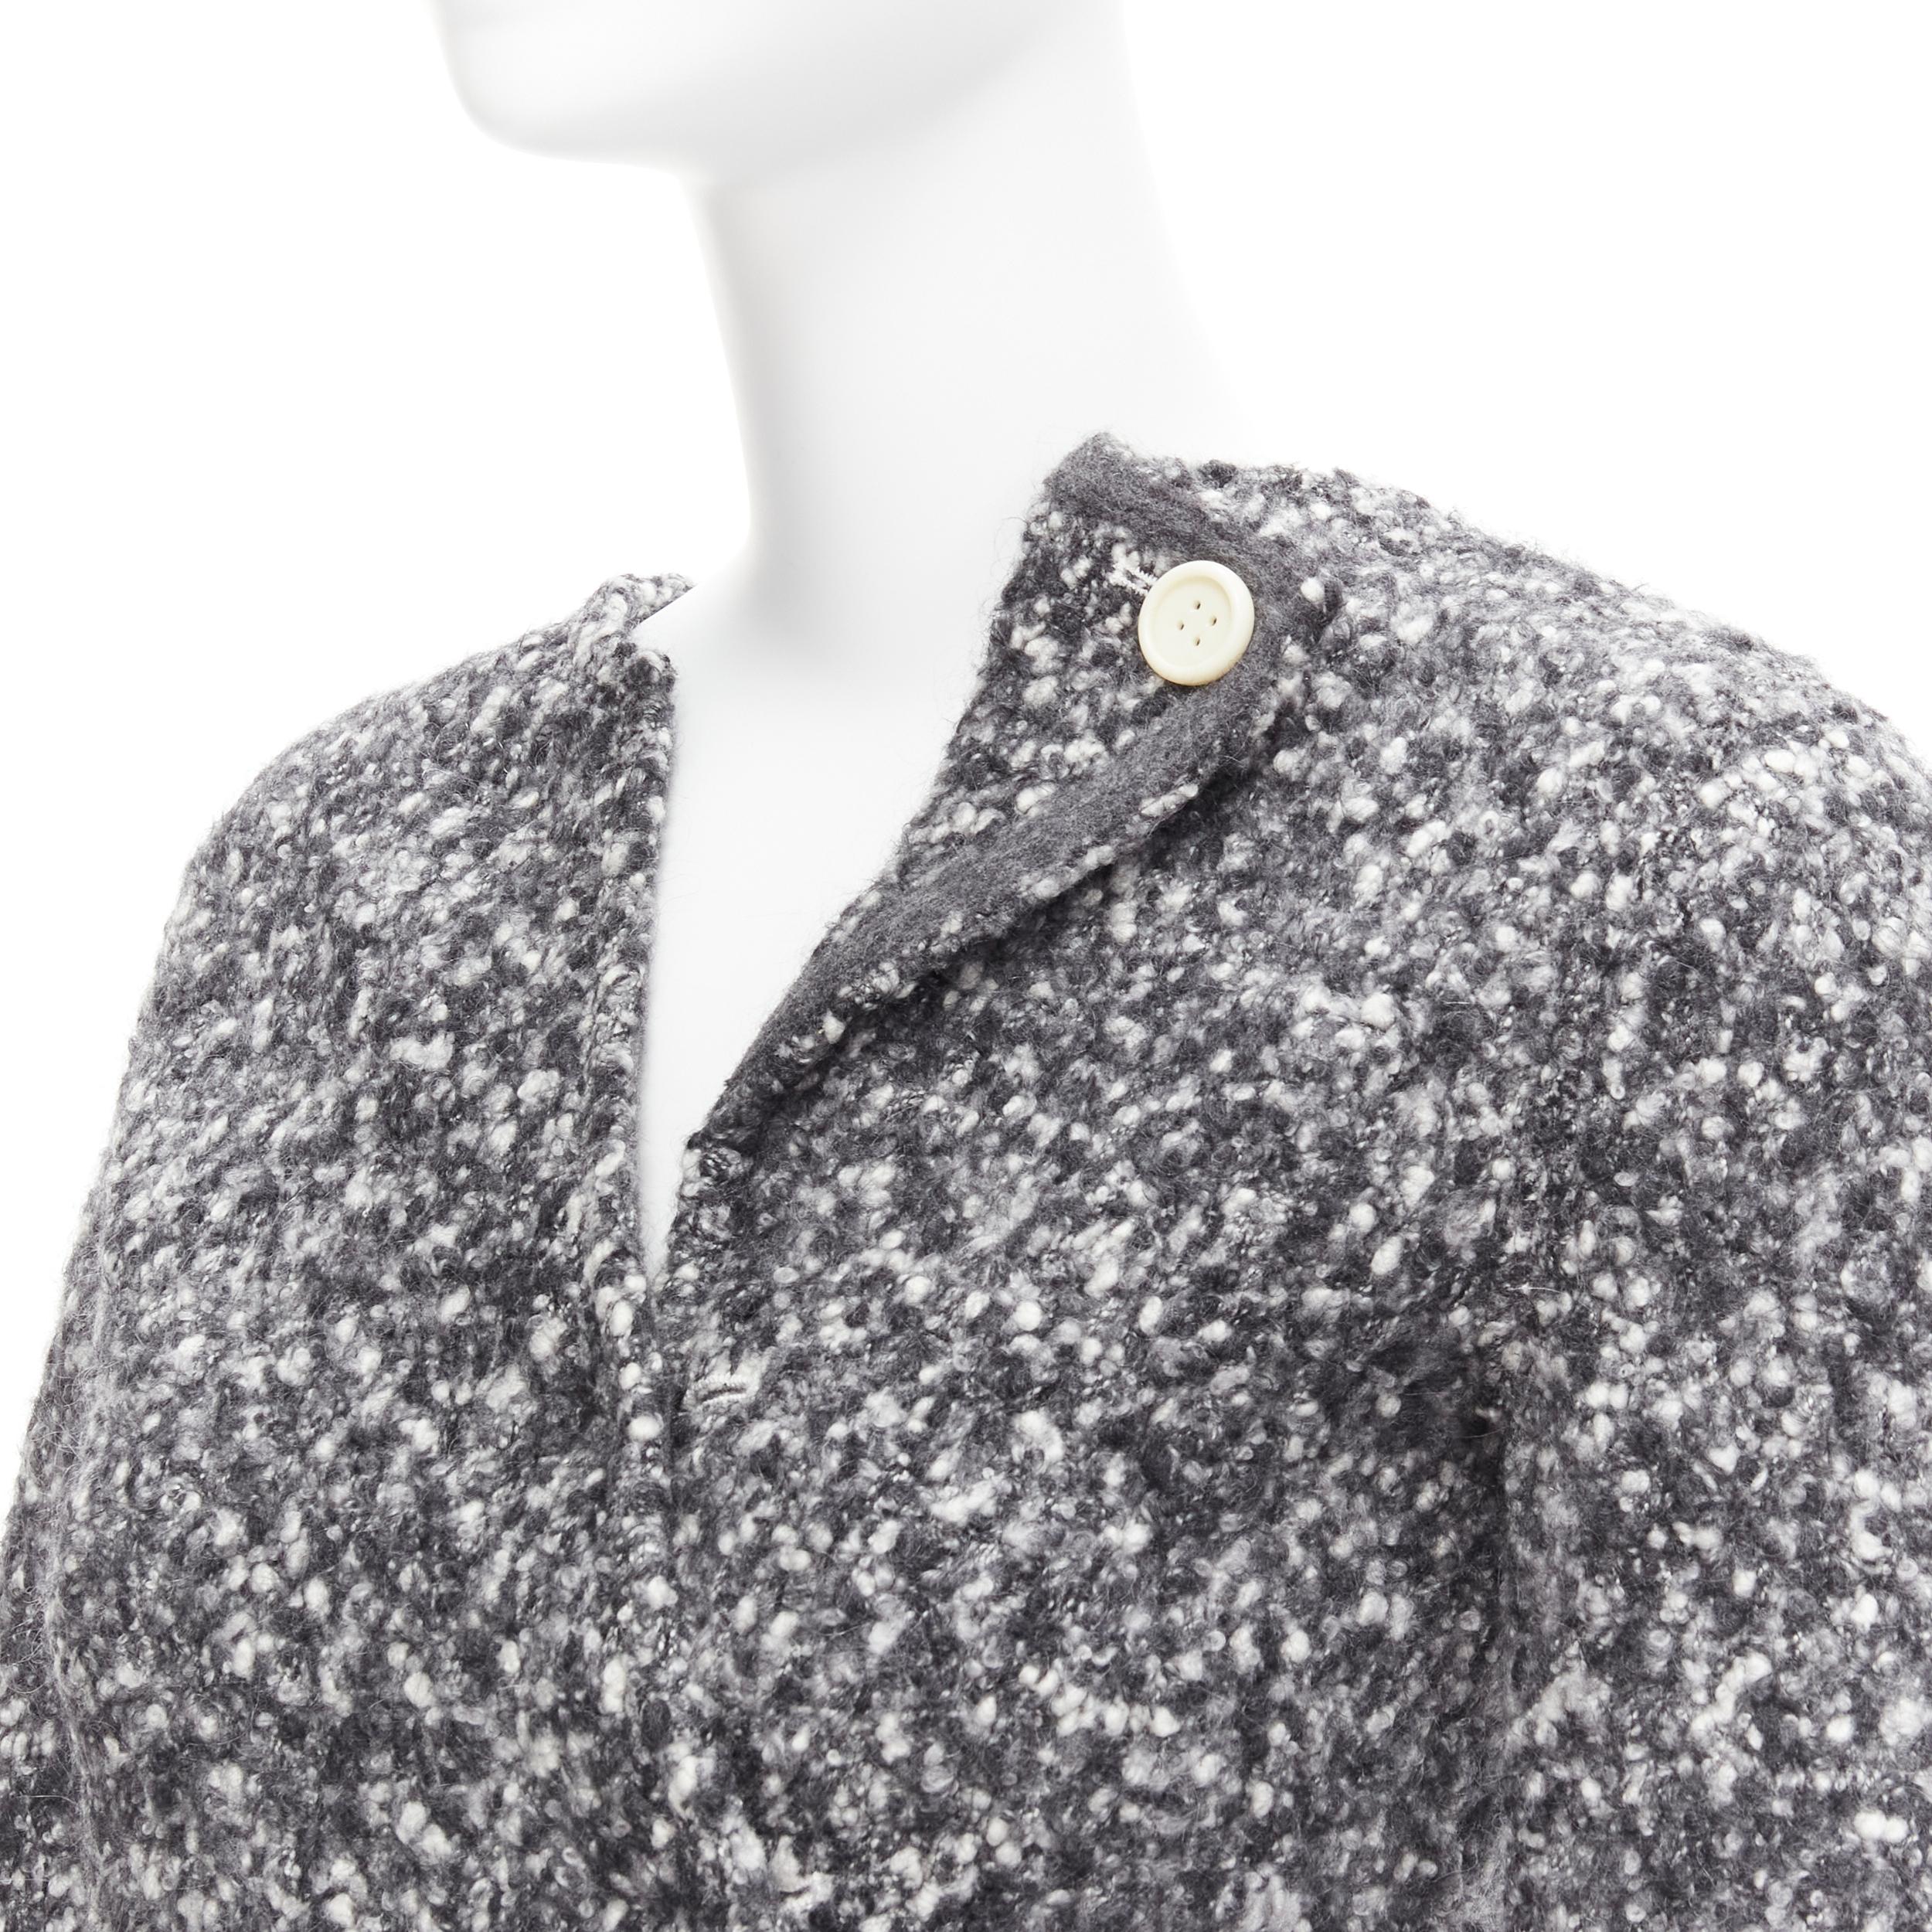 OLD CELINE Runway Phoebe Philo 2014 grey wool boucle bias diagonal top FR34 XS
Reference: TGAS/C01978
Brand: Celine
Designer: Phoebe Philo
Collection: Fall 2014 - Runway
Material: Wool, Polyamide, Mohair
Color: Grey, White
Pattern: Solid
Closure: